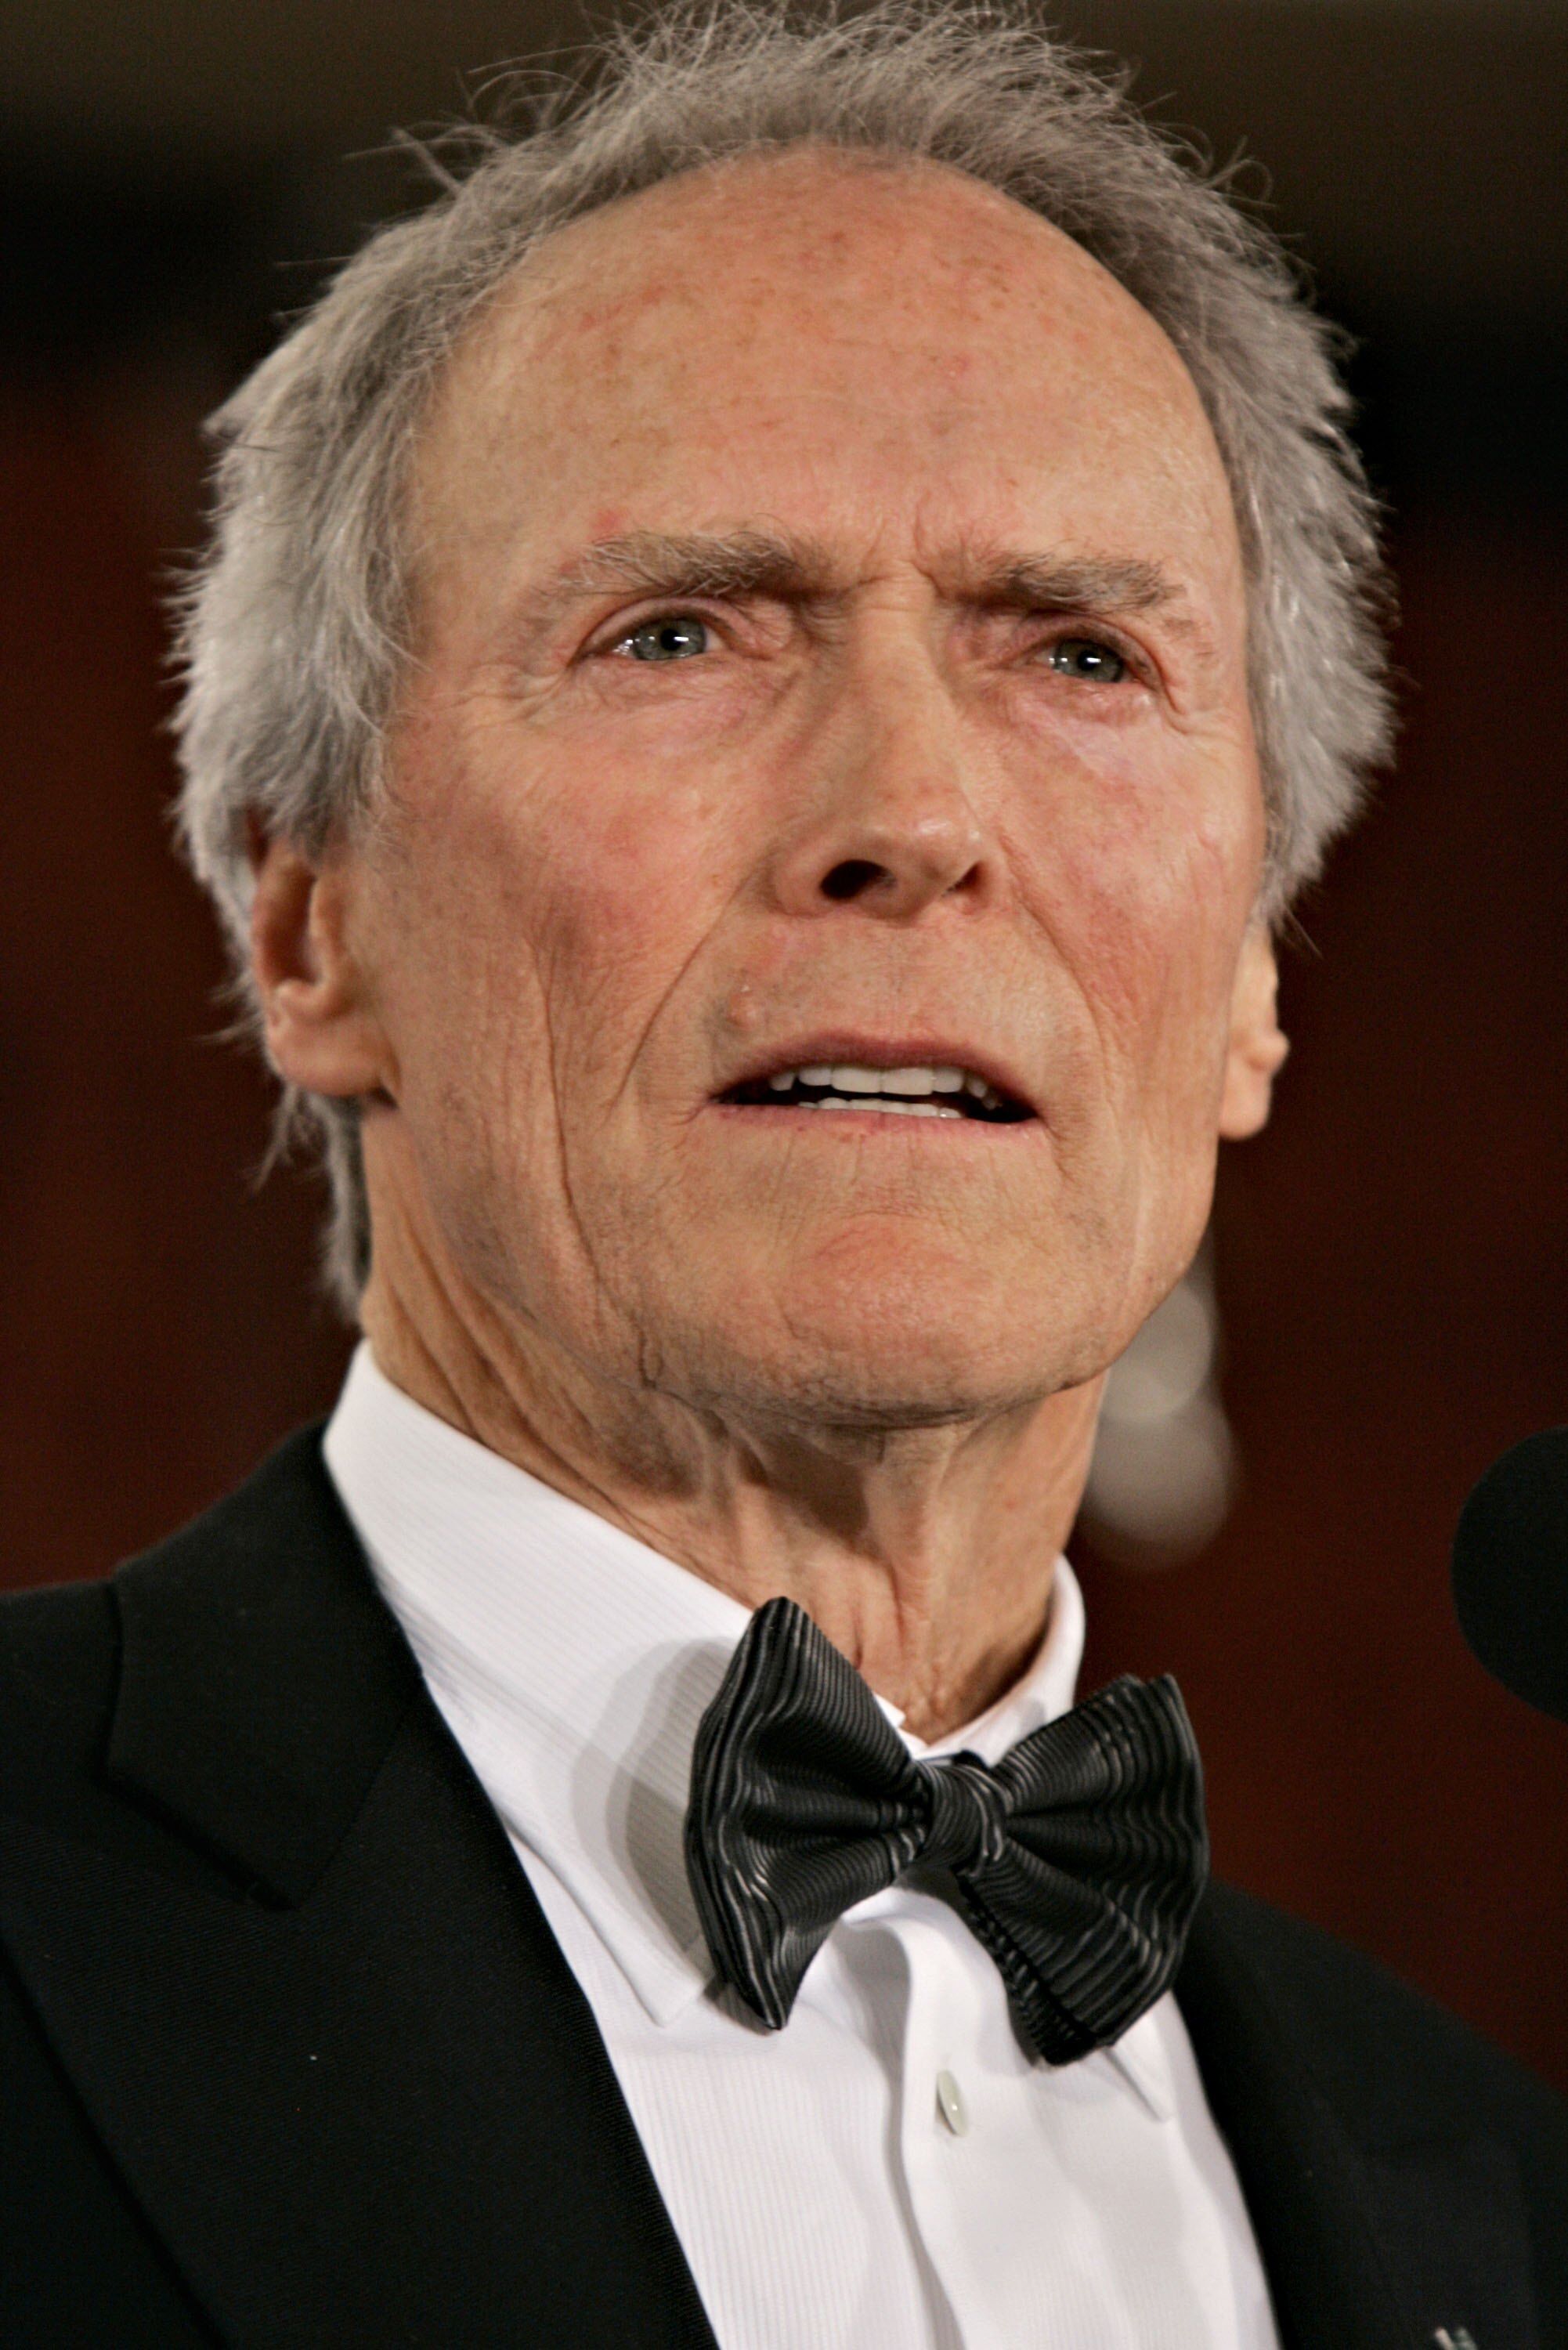 Clint Eastwood. I Image: Getty Images.